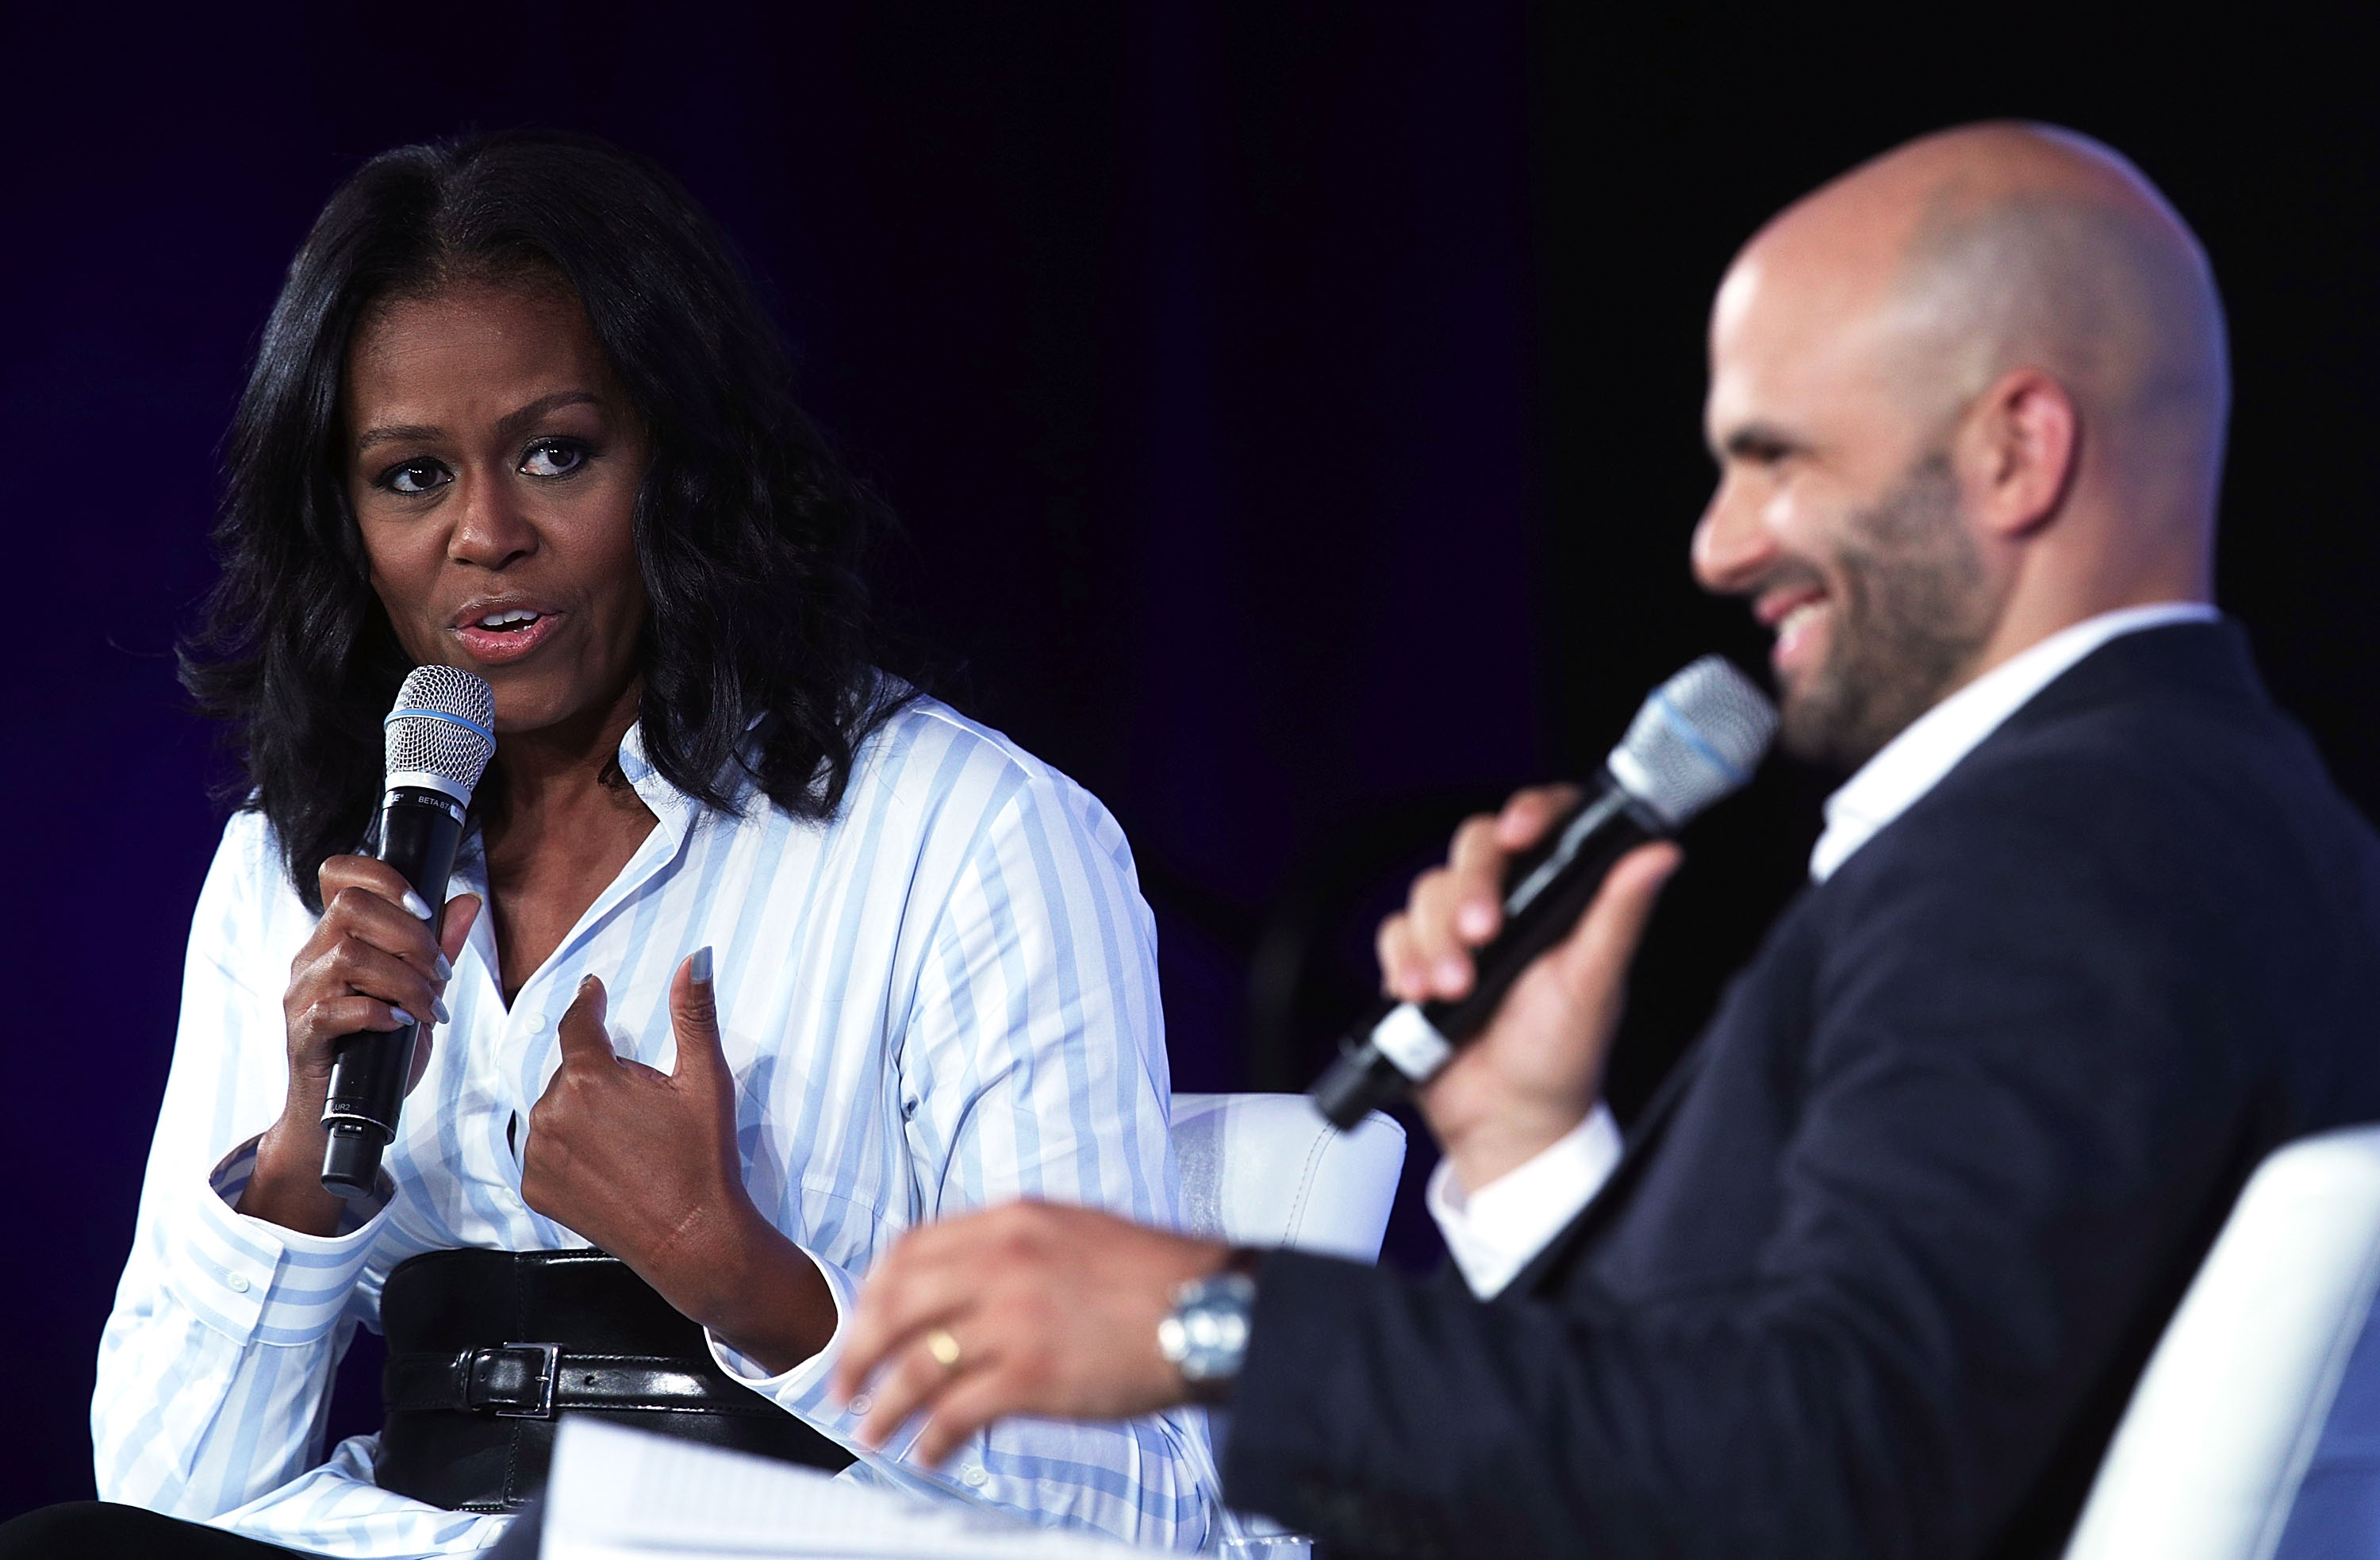 WASHINGTON, DC - MAY 12:  Former First Lady Michelle Obama (L) participates in a discussion with former White House chef and Senior Policy Advisor for Nutrition Policy Sam Kass (R) during the Partnership for a Healthier America Summit May 12, 2017 in Washington, DC. The PHA held its summit to address childhood obesity.  (Photo by Alex Wong/Getty Images) (Alex Wong-Getty Images)